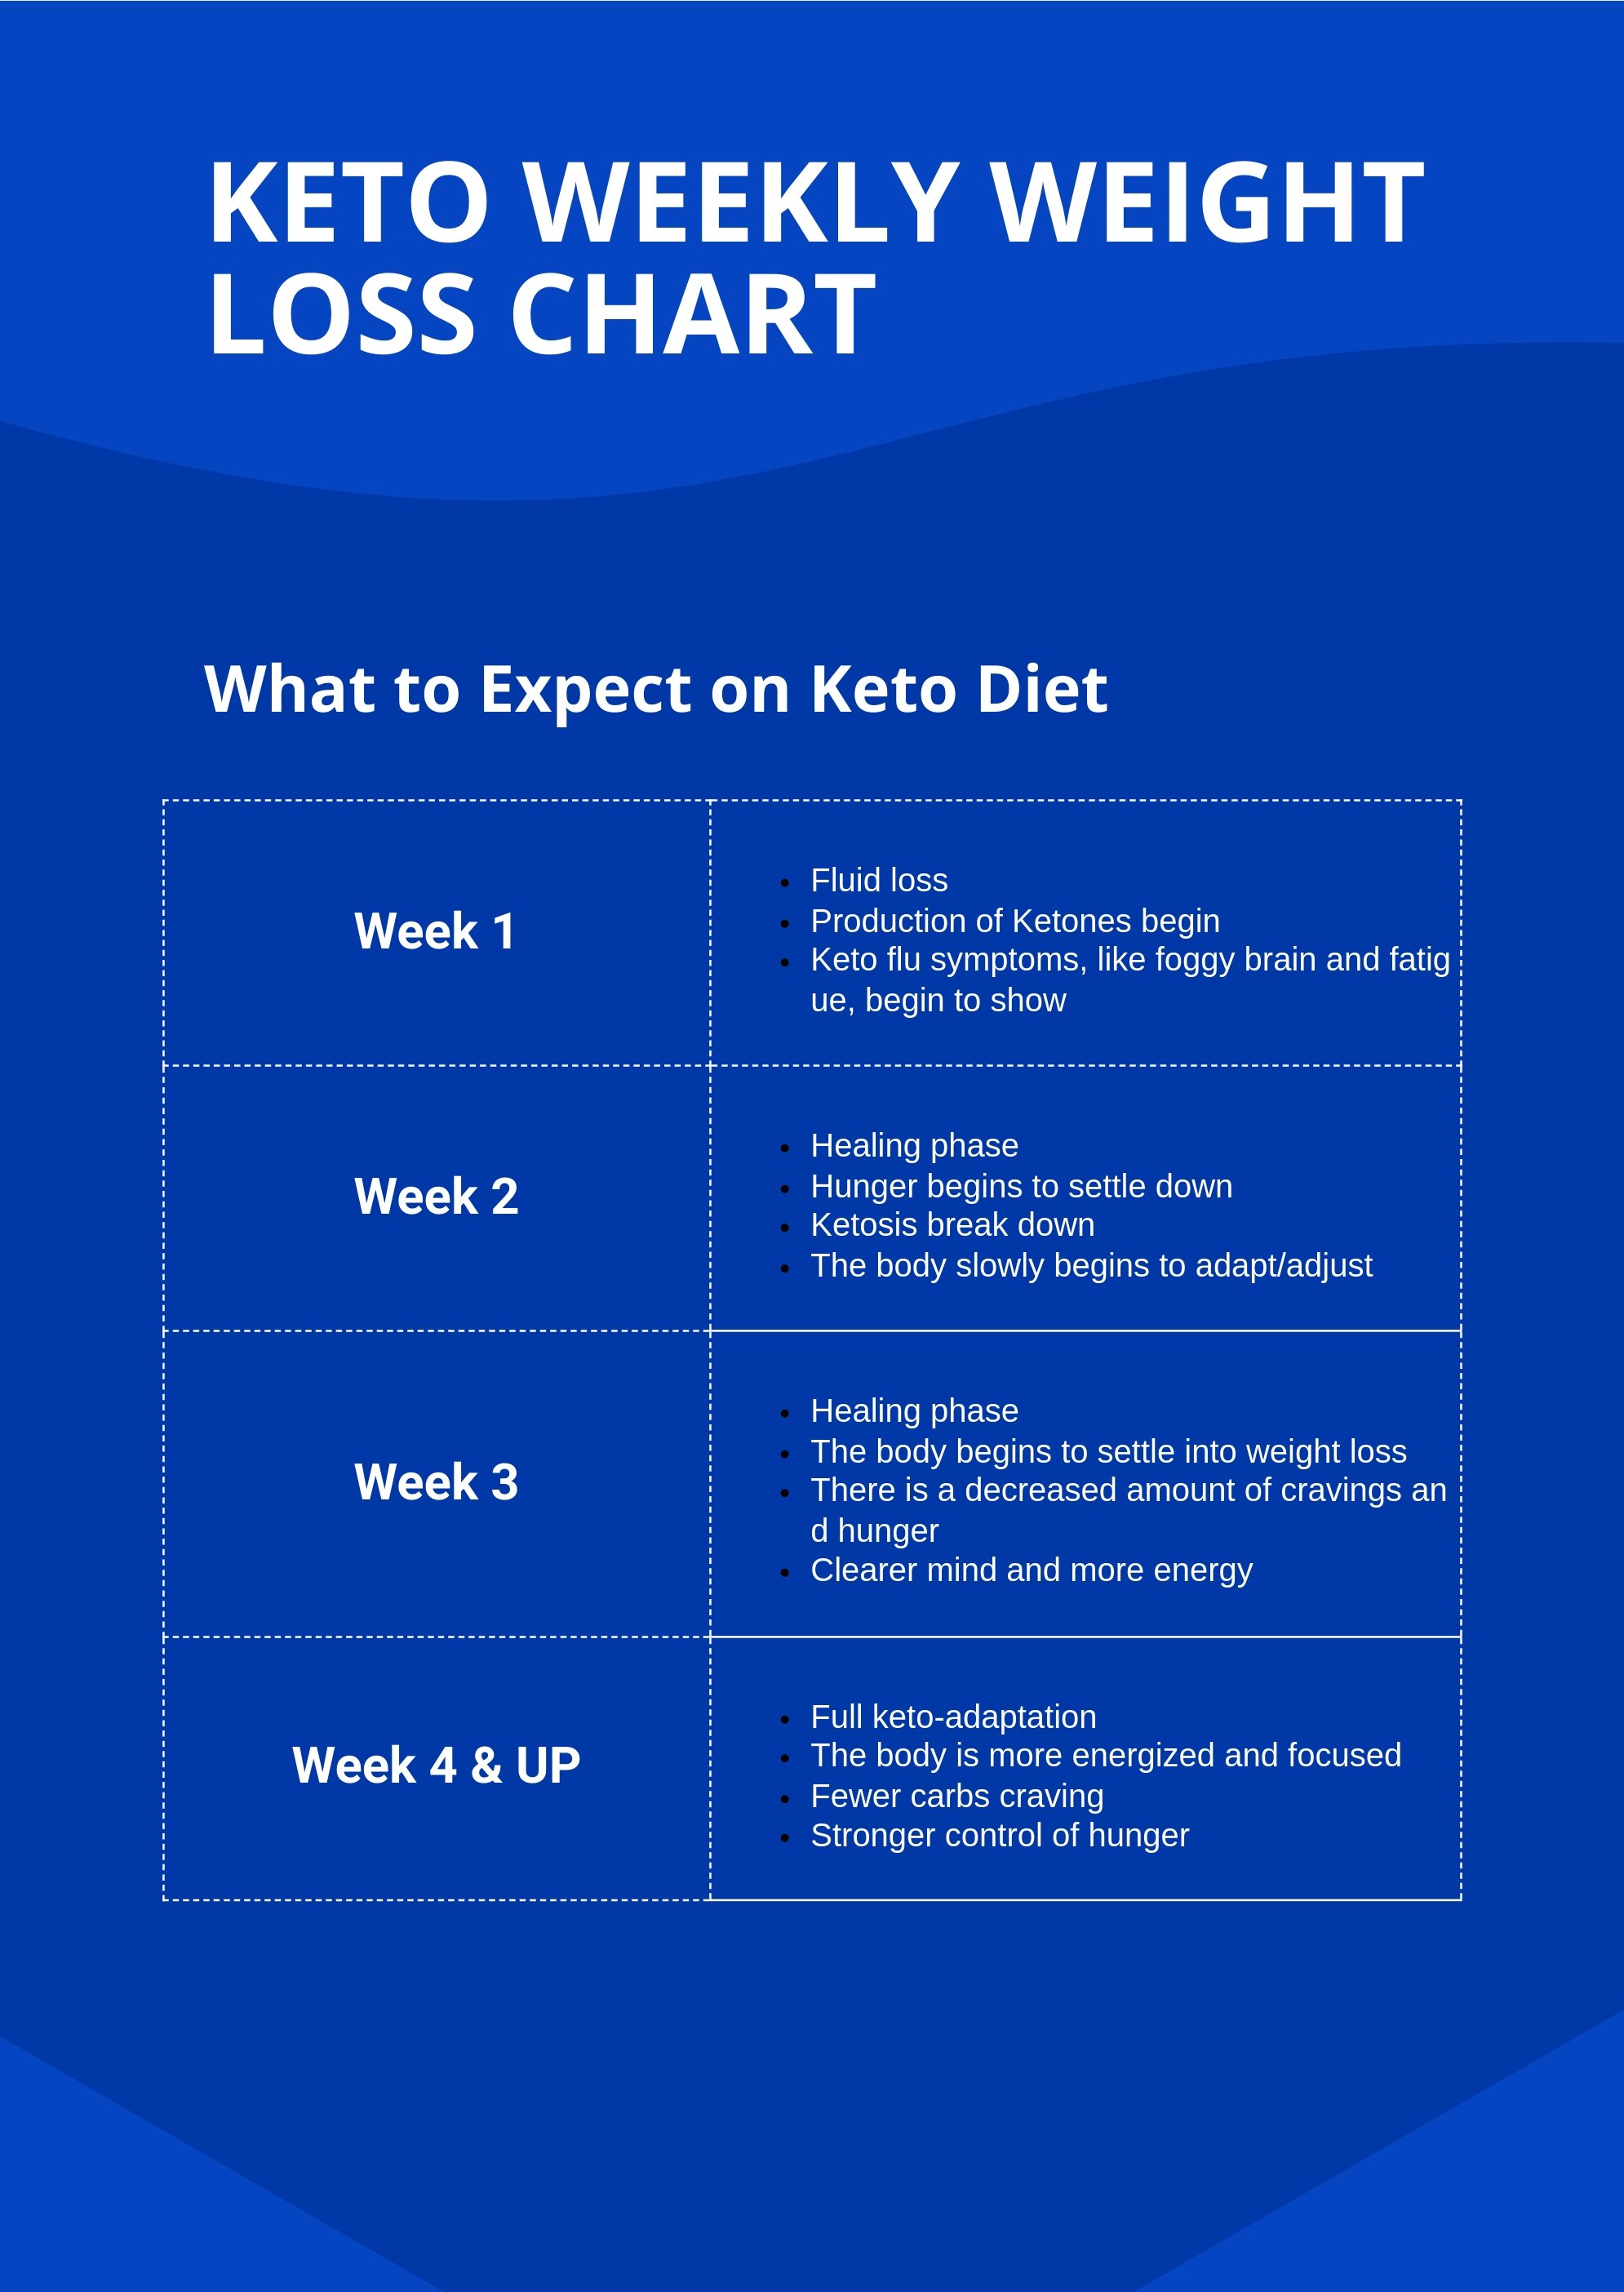 Keto Weekly Weight Loss Chart in PDF, Illustrator